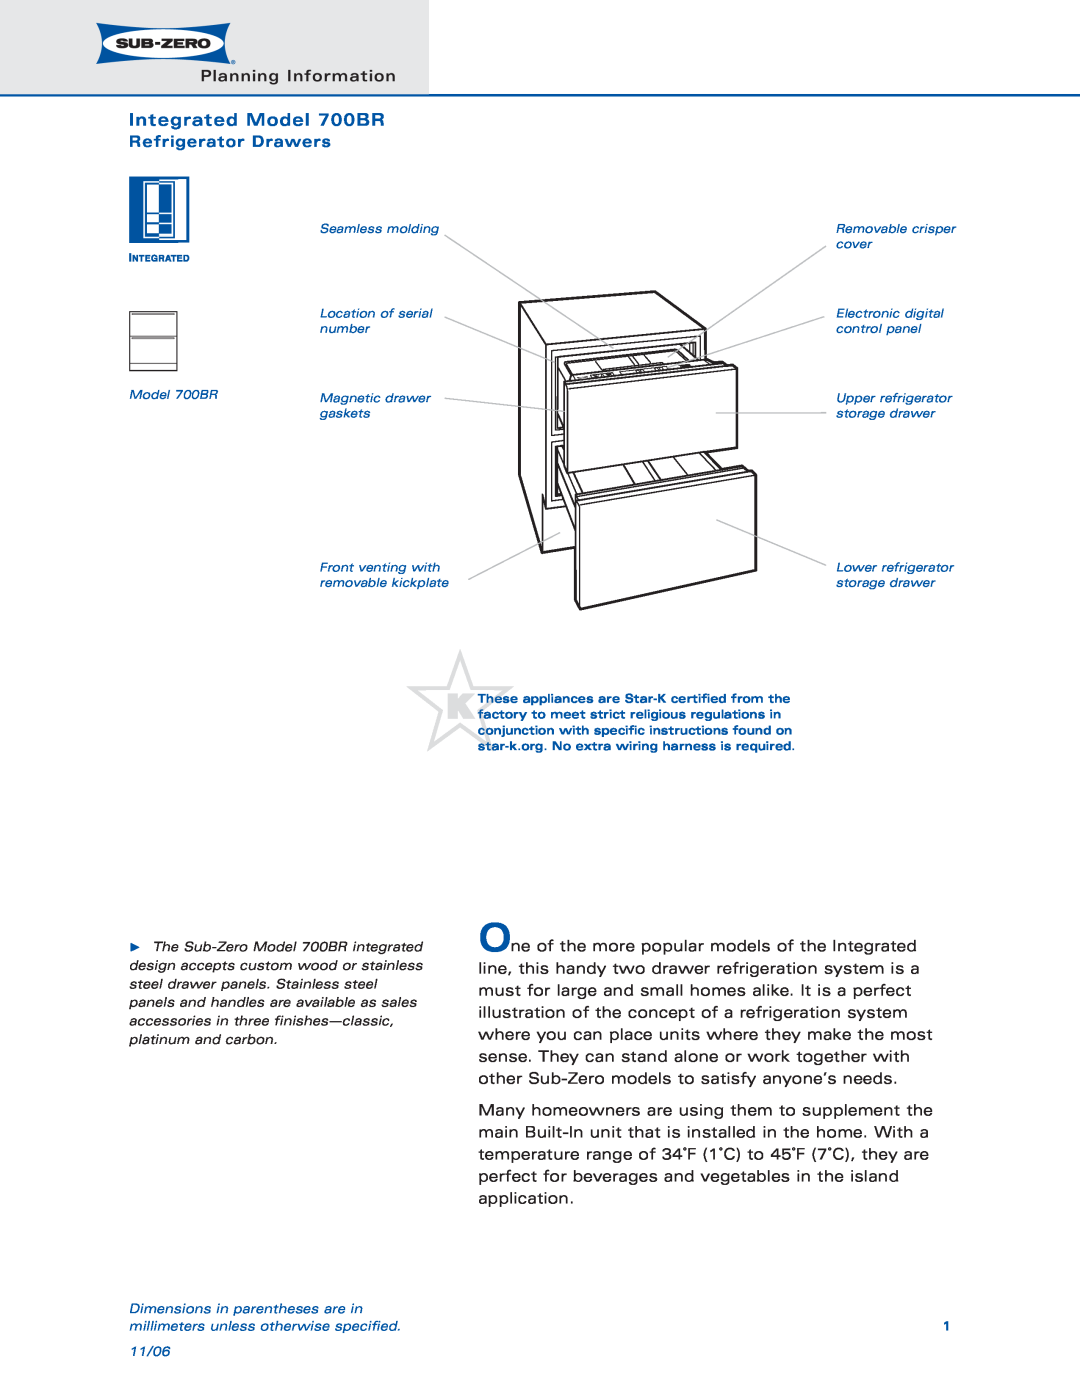 Sub-Zero dimensions Integrated Model 700BR, Planning Information, Refrigerator Drawers 